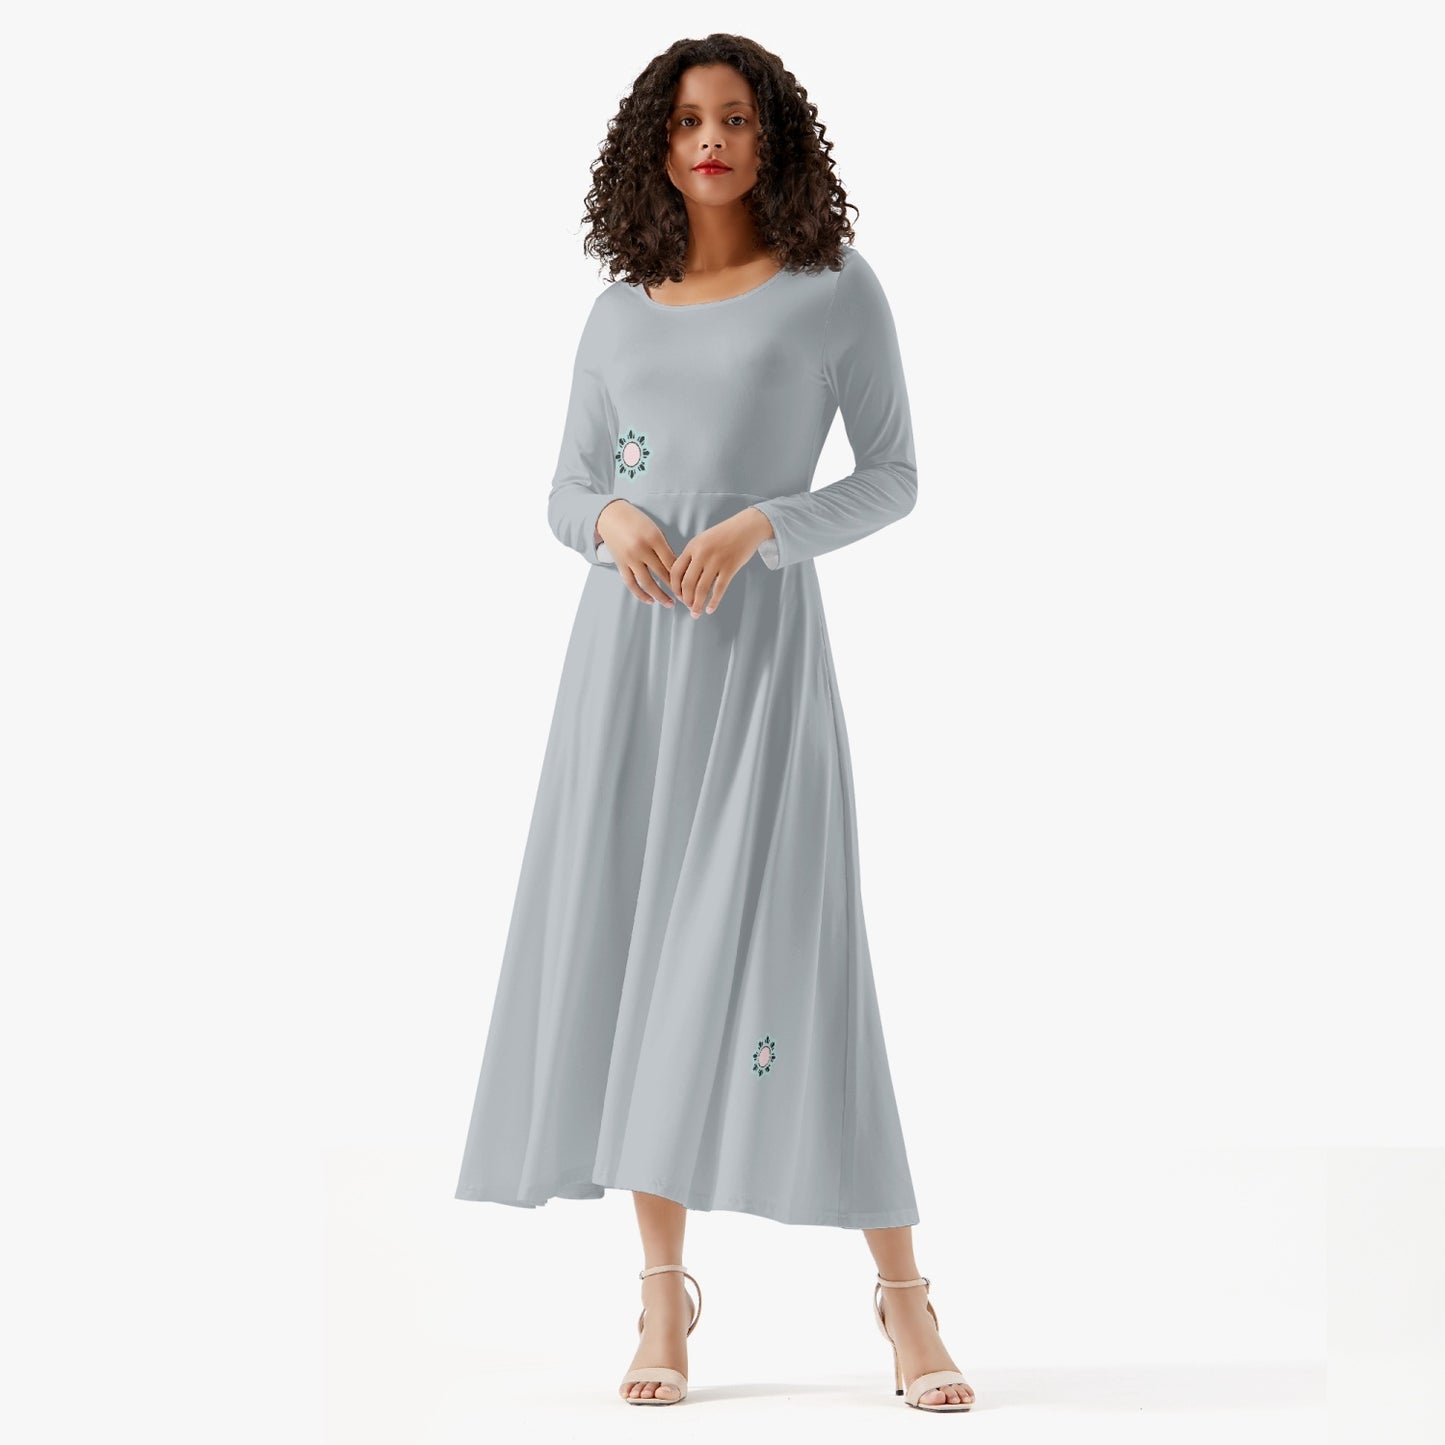 Ultimate Chic: Long-Sleeve Dress Neutral Blue